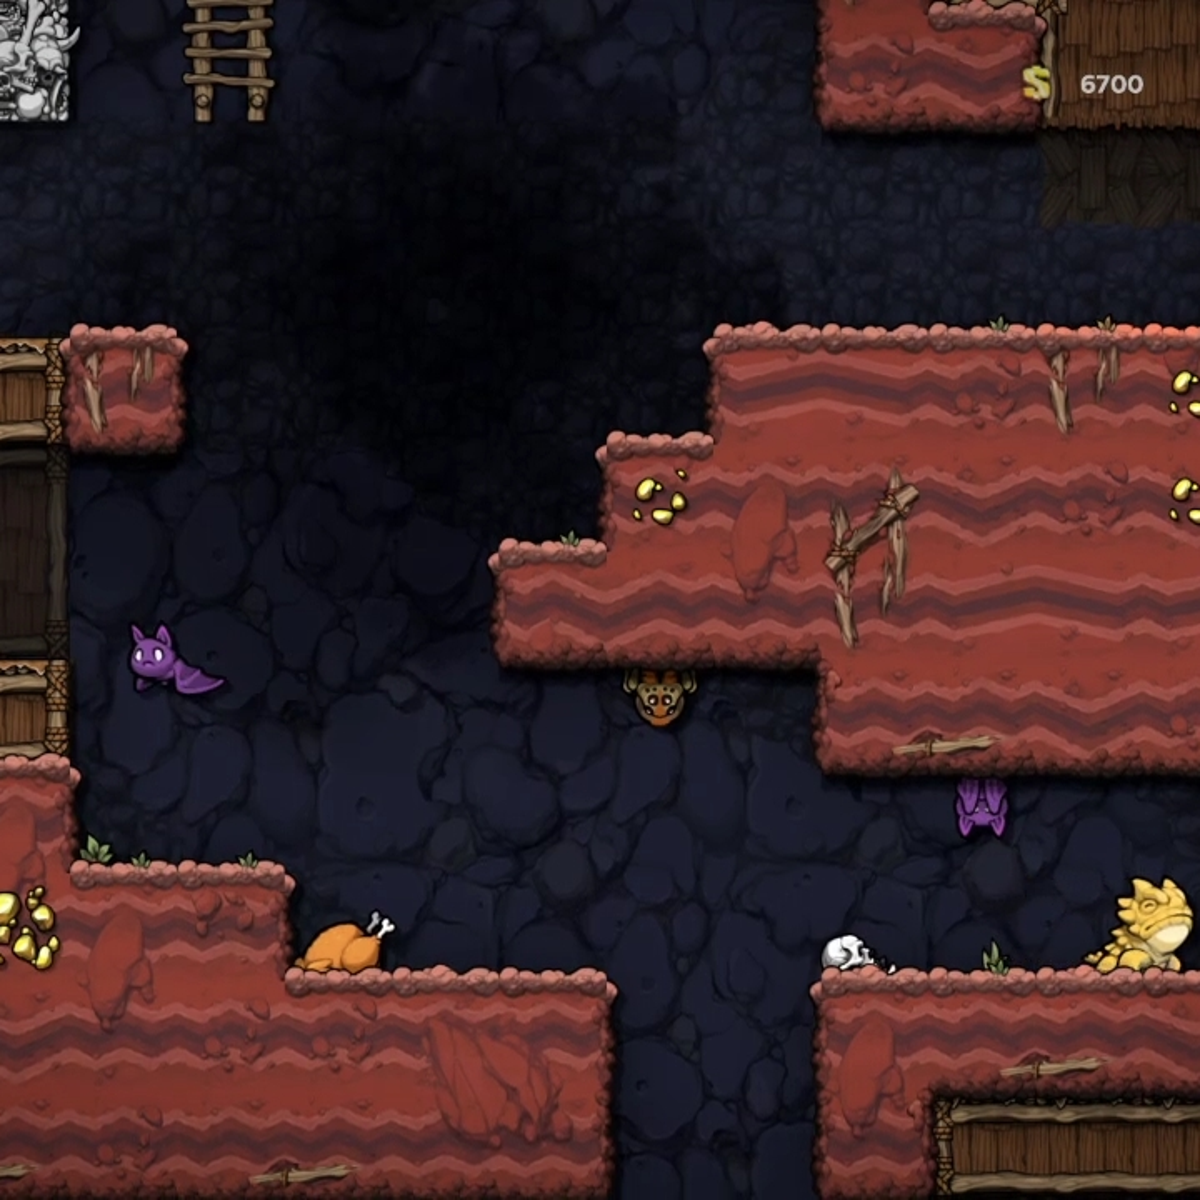 Spelunky 2 beginner's guide: tips and tricks to beating world one